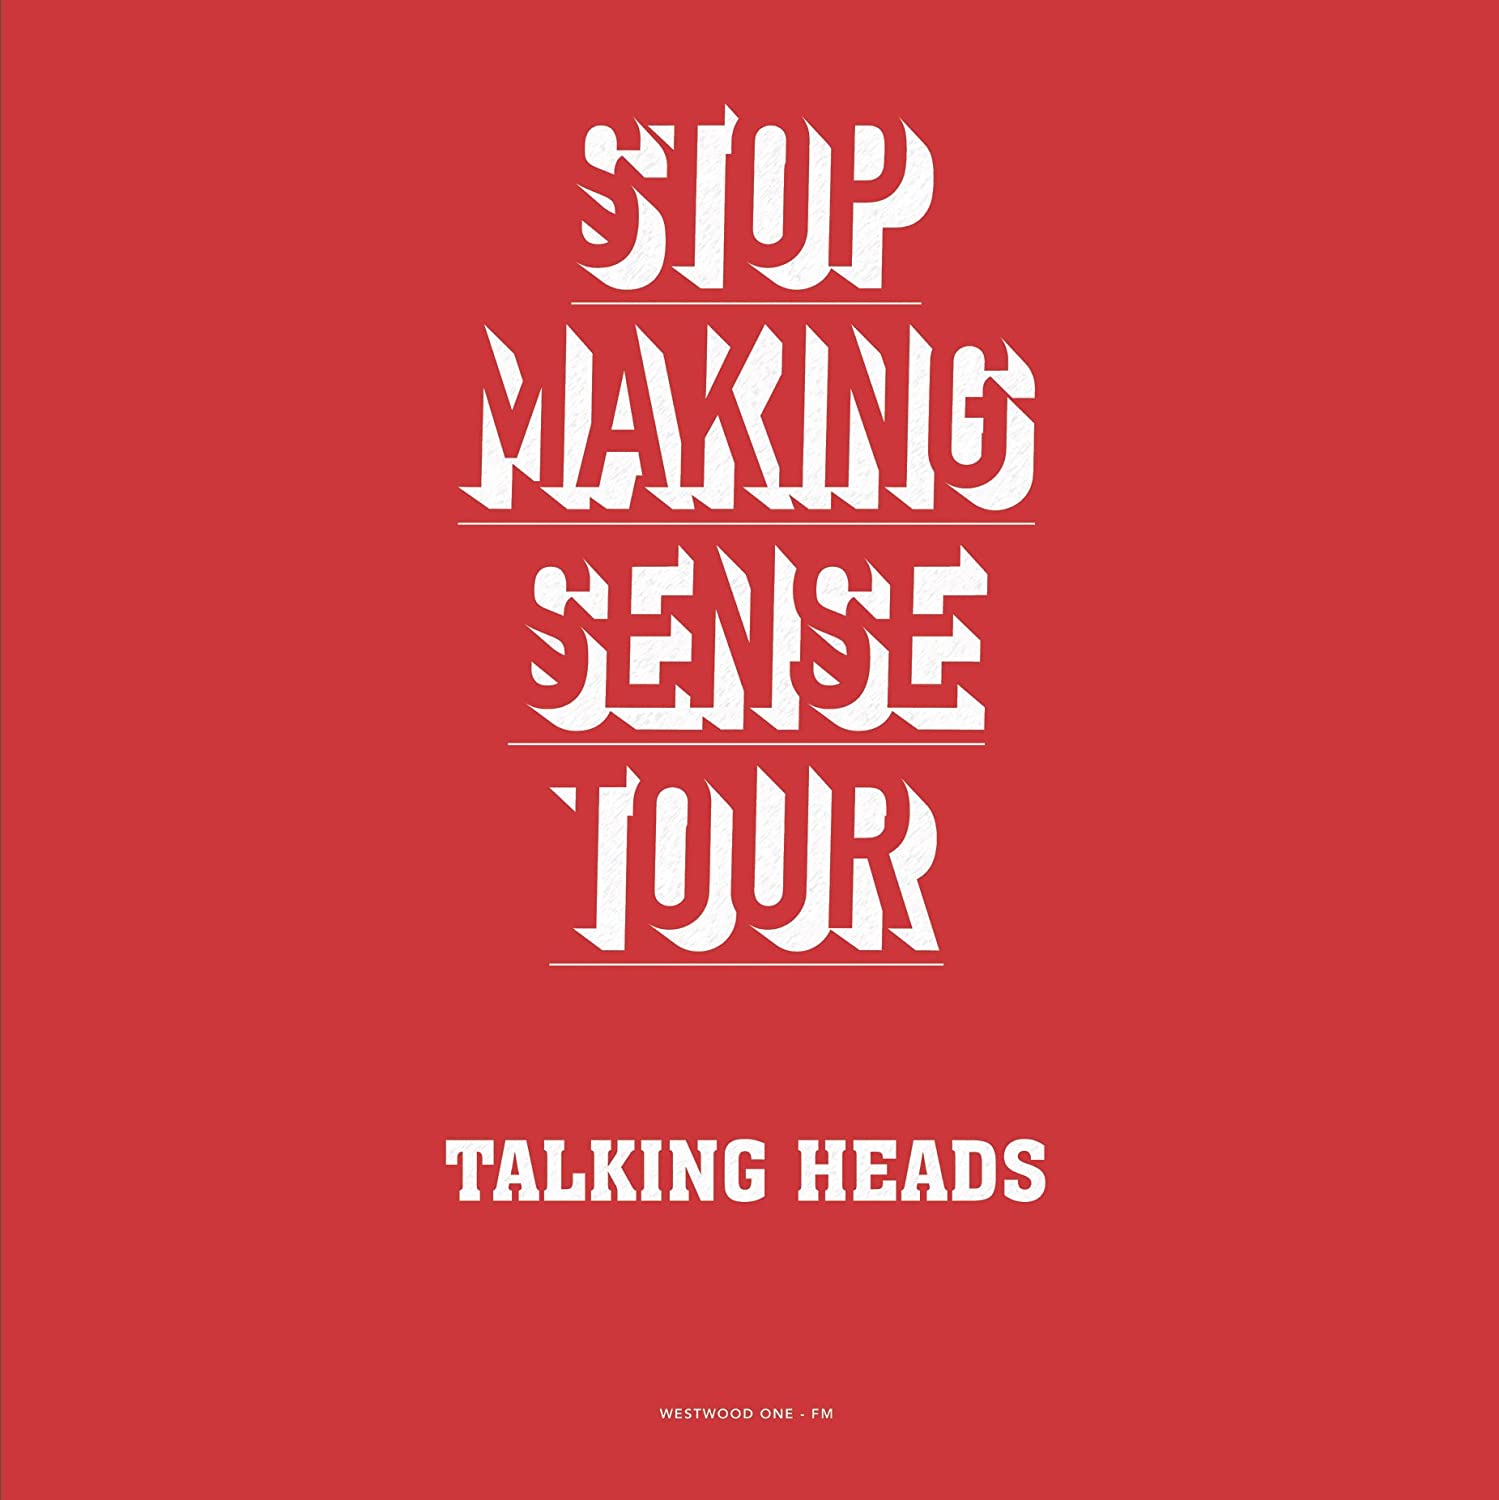 Live radio broadcast on Vinyl from Talking Heads from the Stop Making Sense Tour.